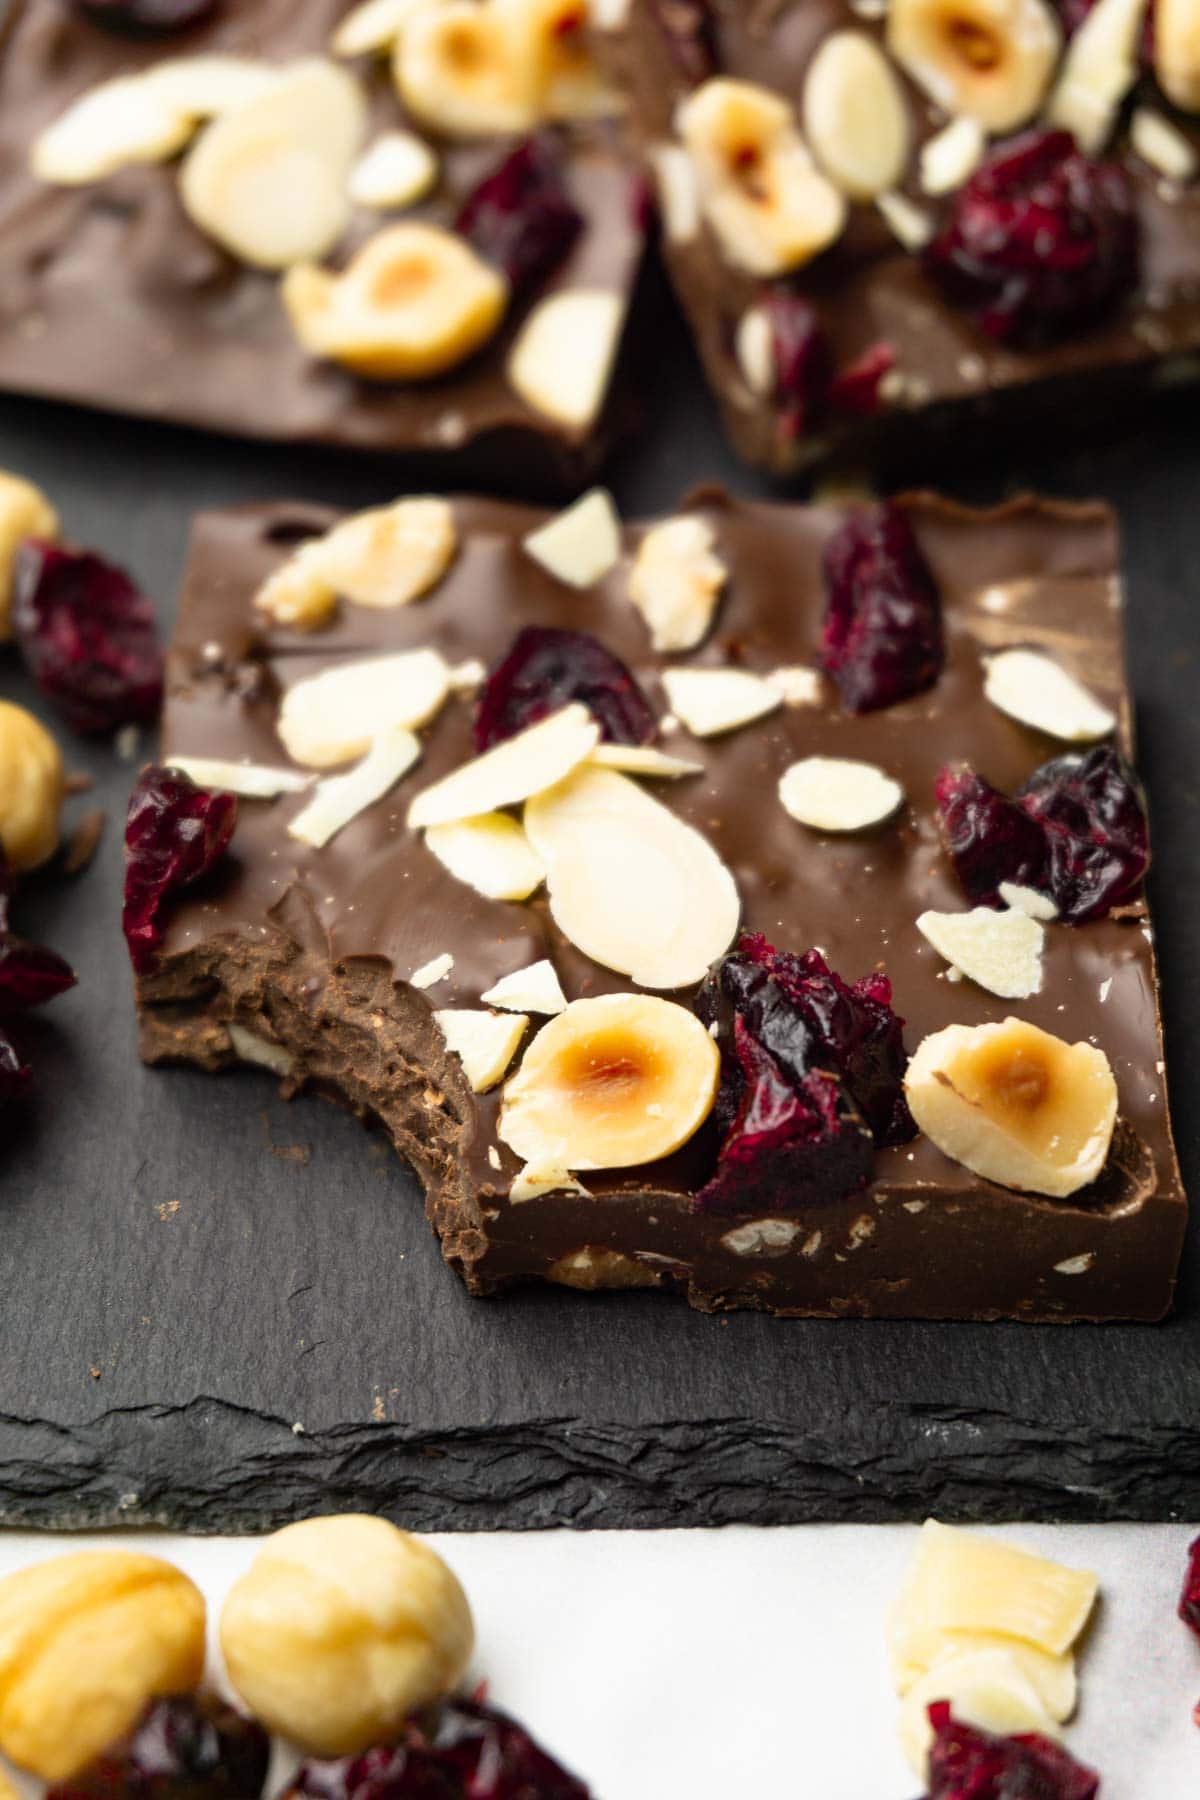 Pieces of dark chocolate bark with dried cranberries and roasted hazelnuts served on a dark serving stone board, one bite taken from one of the pieces.